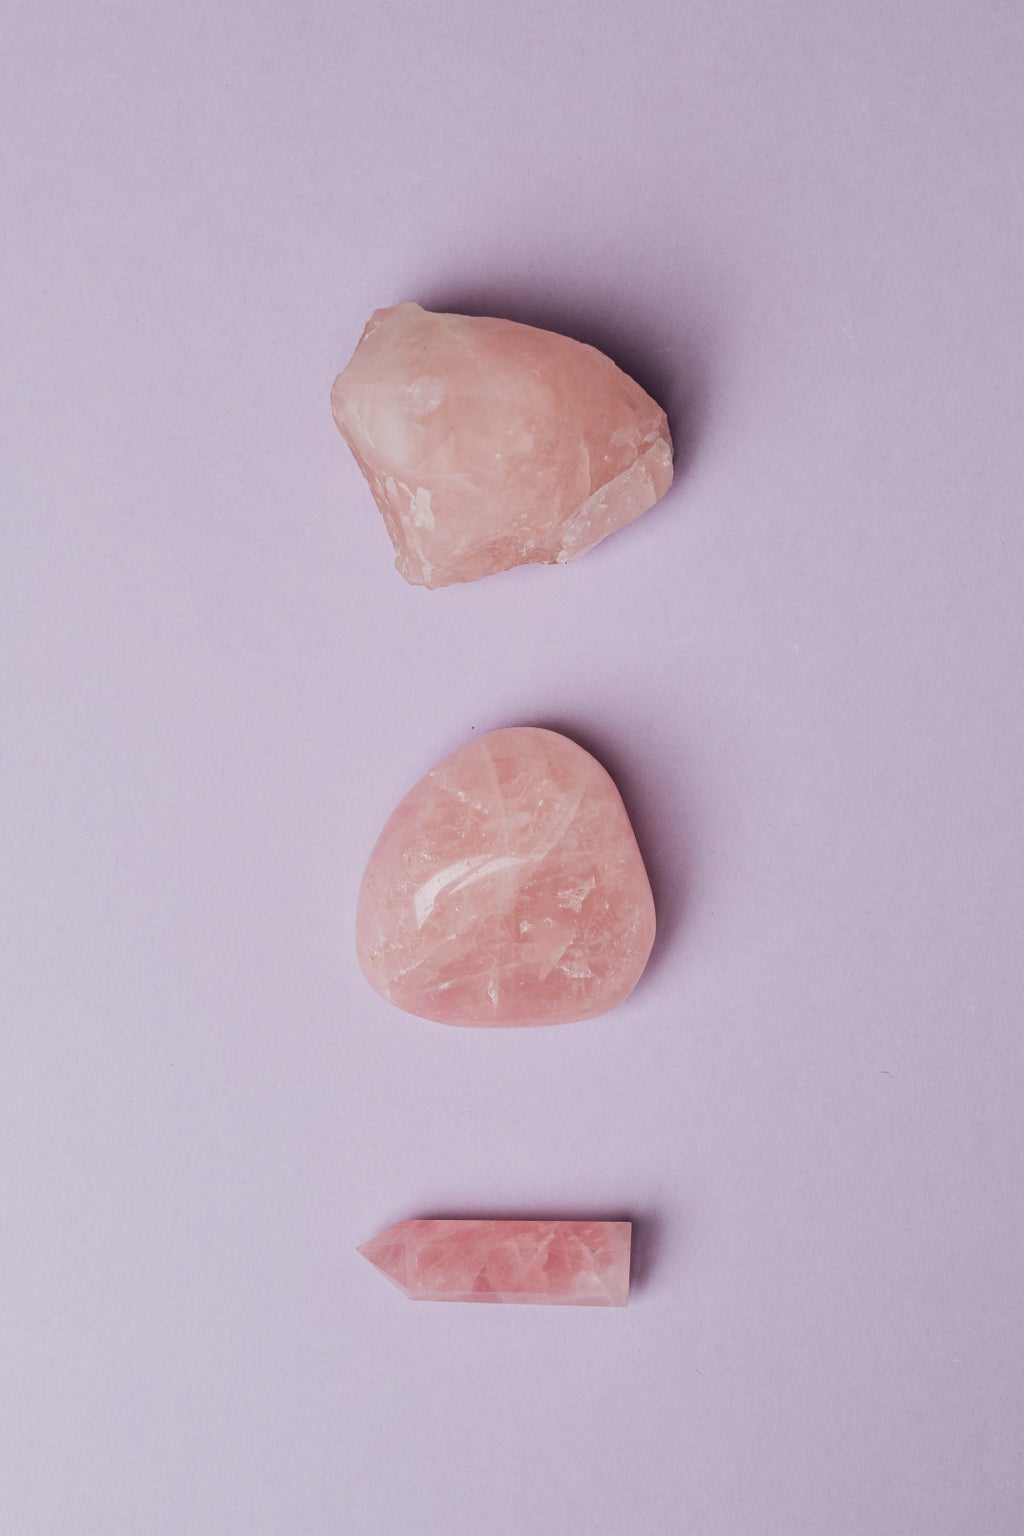 Crystals For School Rose Quartz?width=1024&height=1024&fit=cover&auto=webp